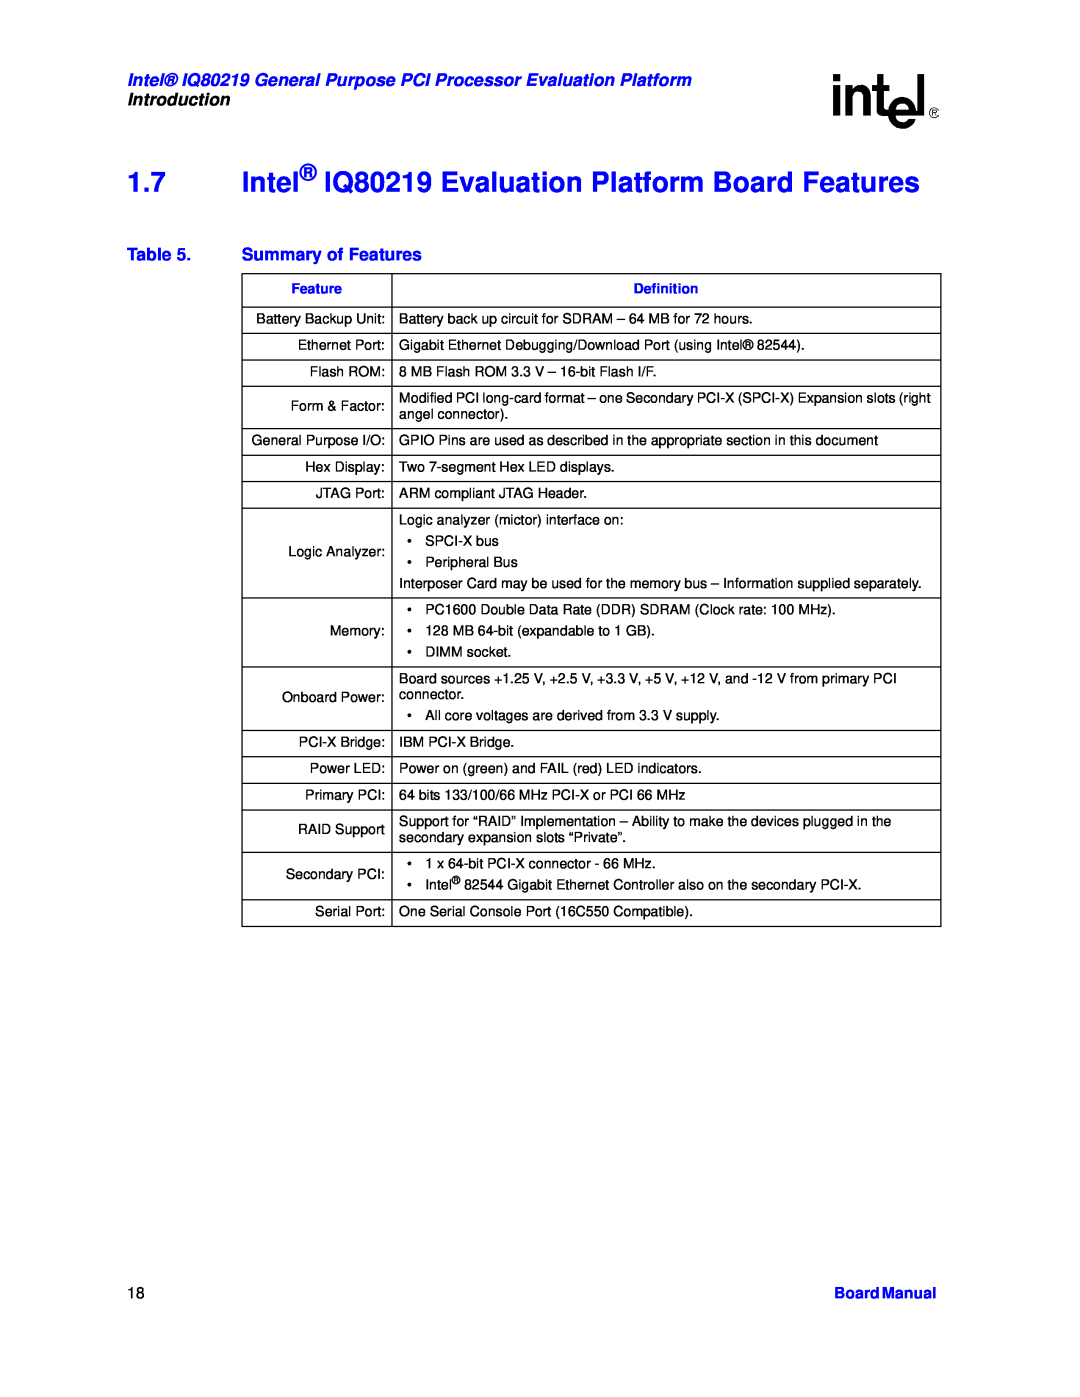 Intel manual Intel IQ80219 Evaluation Platform Board Features, Summary of Features, Introduction, Board Manual 